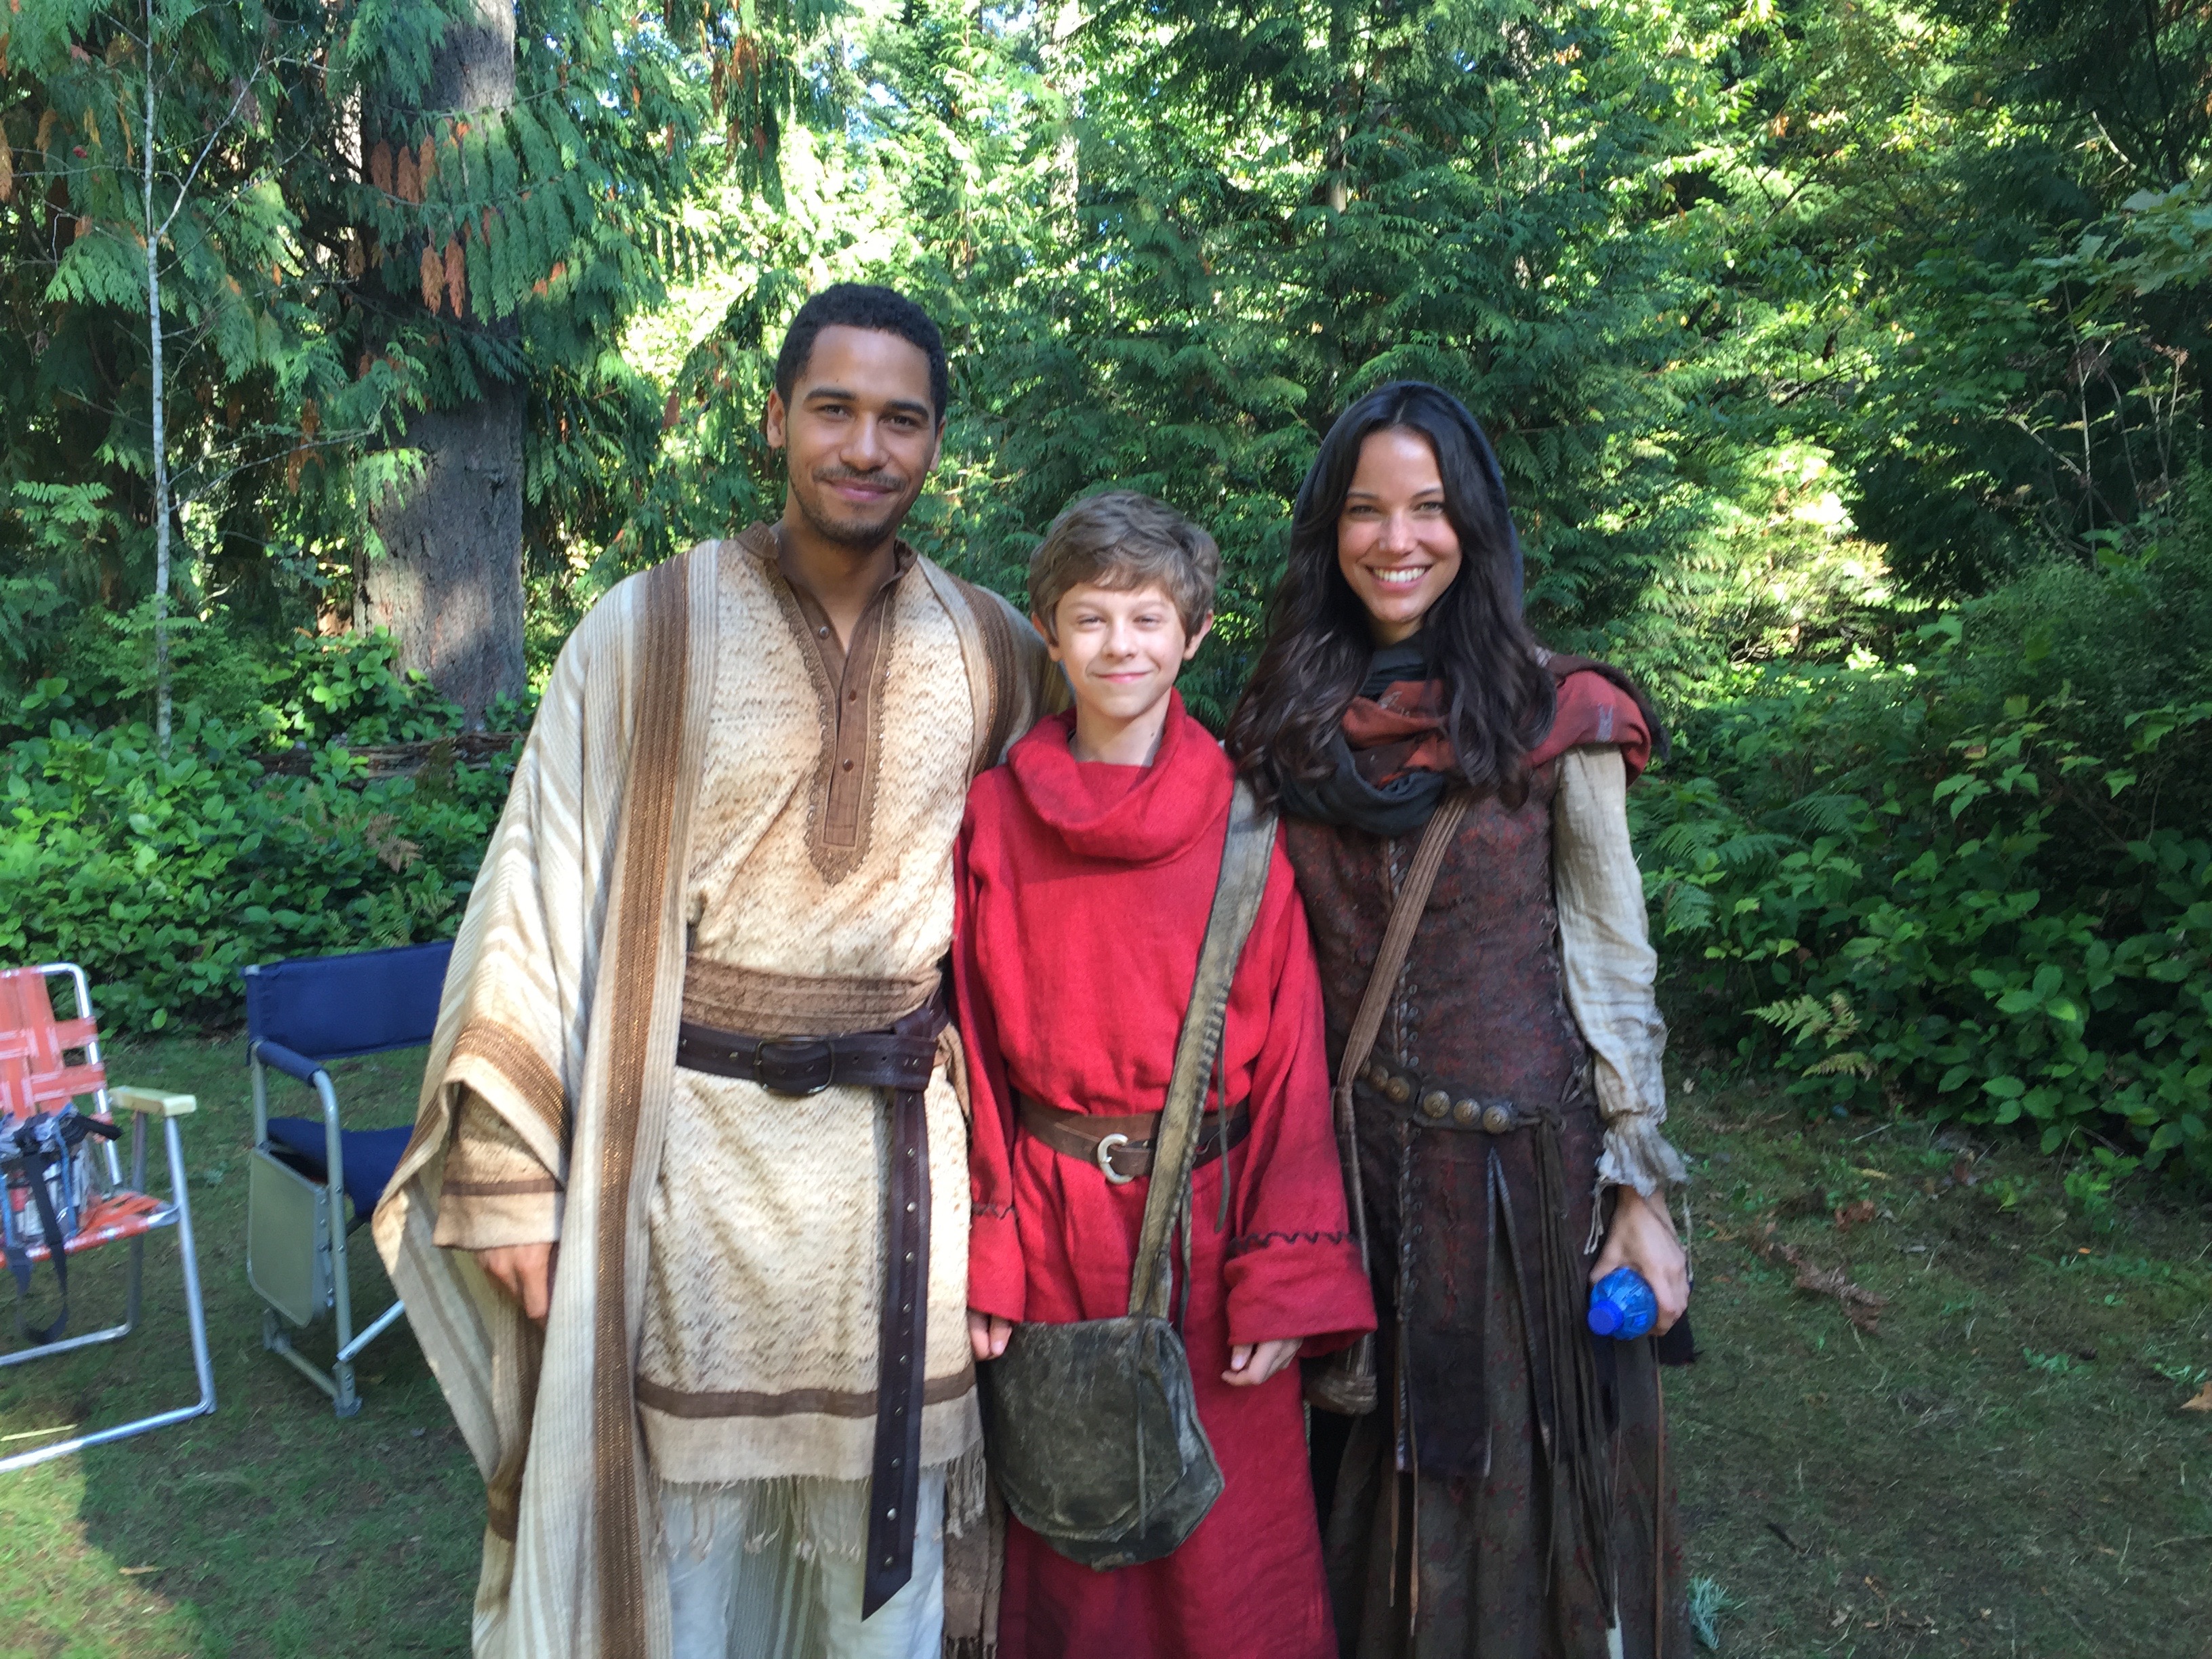 With Elliott Knight (Merlin) and Caroline Ford (Nimue) on the set of Once Upon a Time.